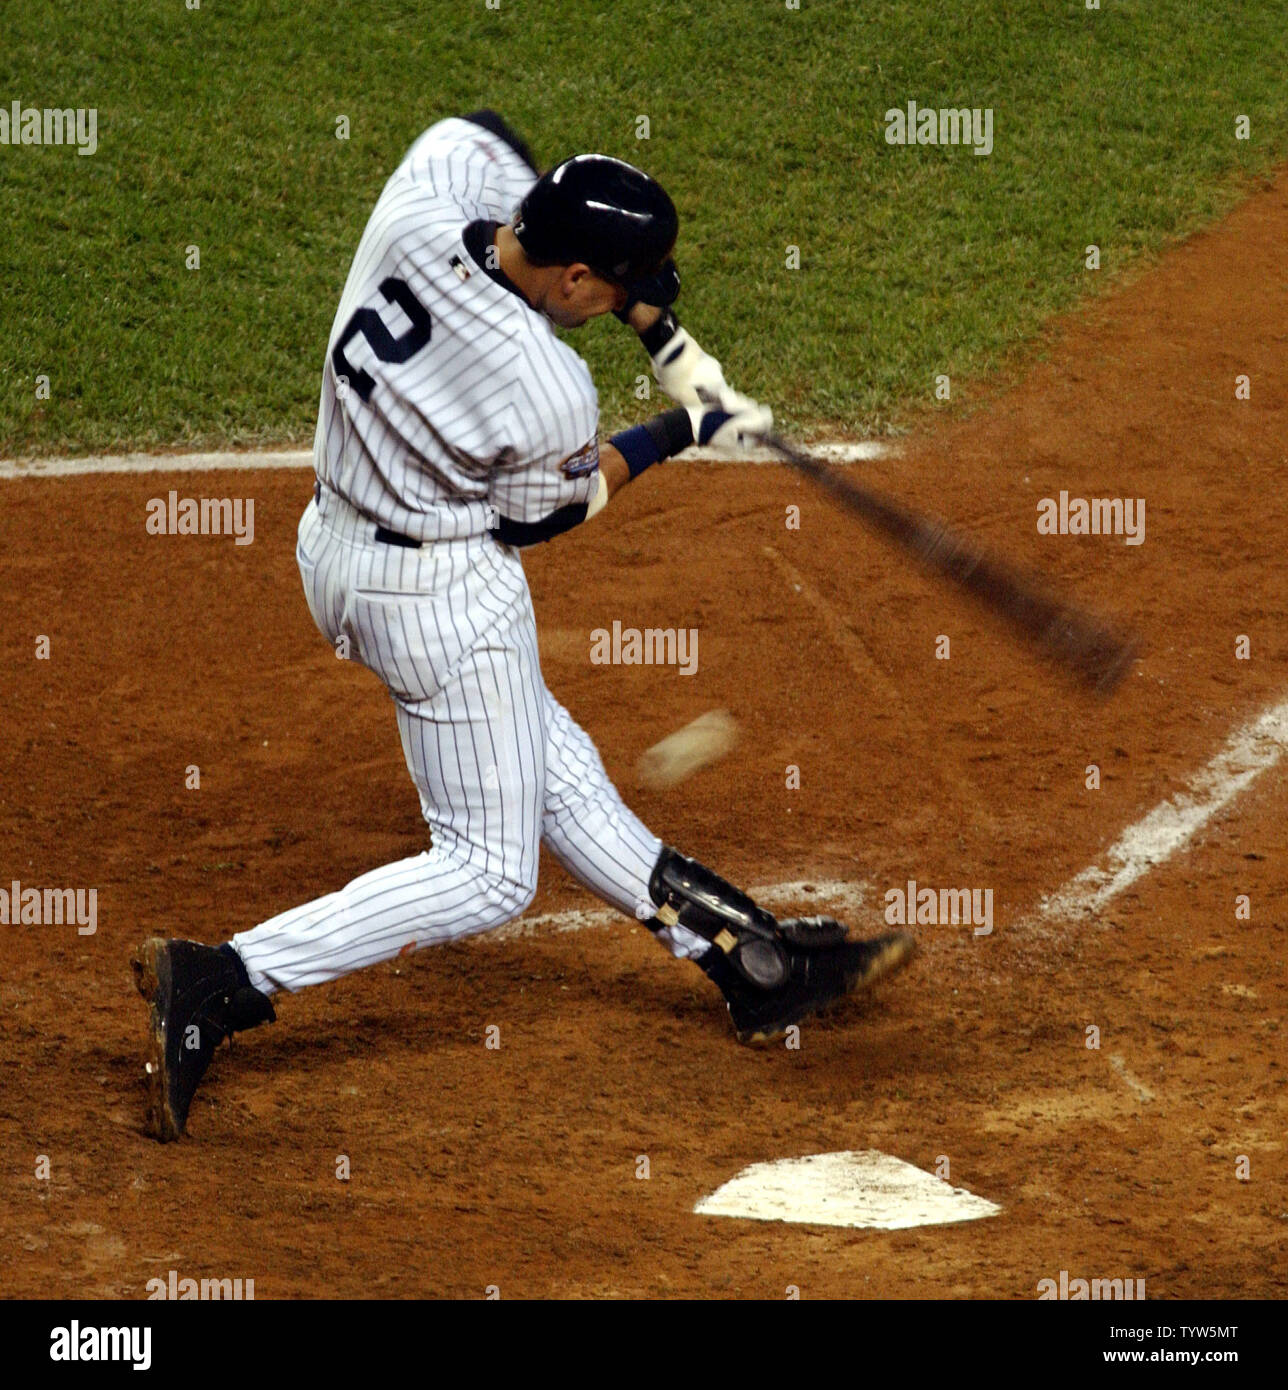 The New York Yankees' Derek Jeter Game fouls a ball off his leg in Game 2 of the World Series against the Florida Marlins on October 19, 2003, at Yankee Stadium. The Yankees defeated the Marlins 6-1.   (UPI/Roger L. Wollenberg) Stock Photo